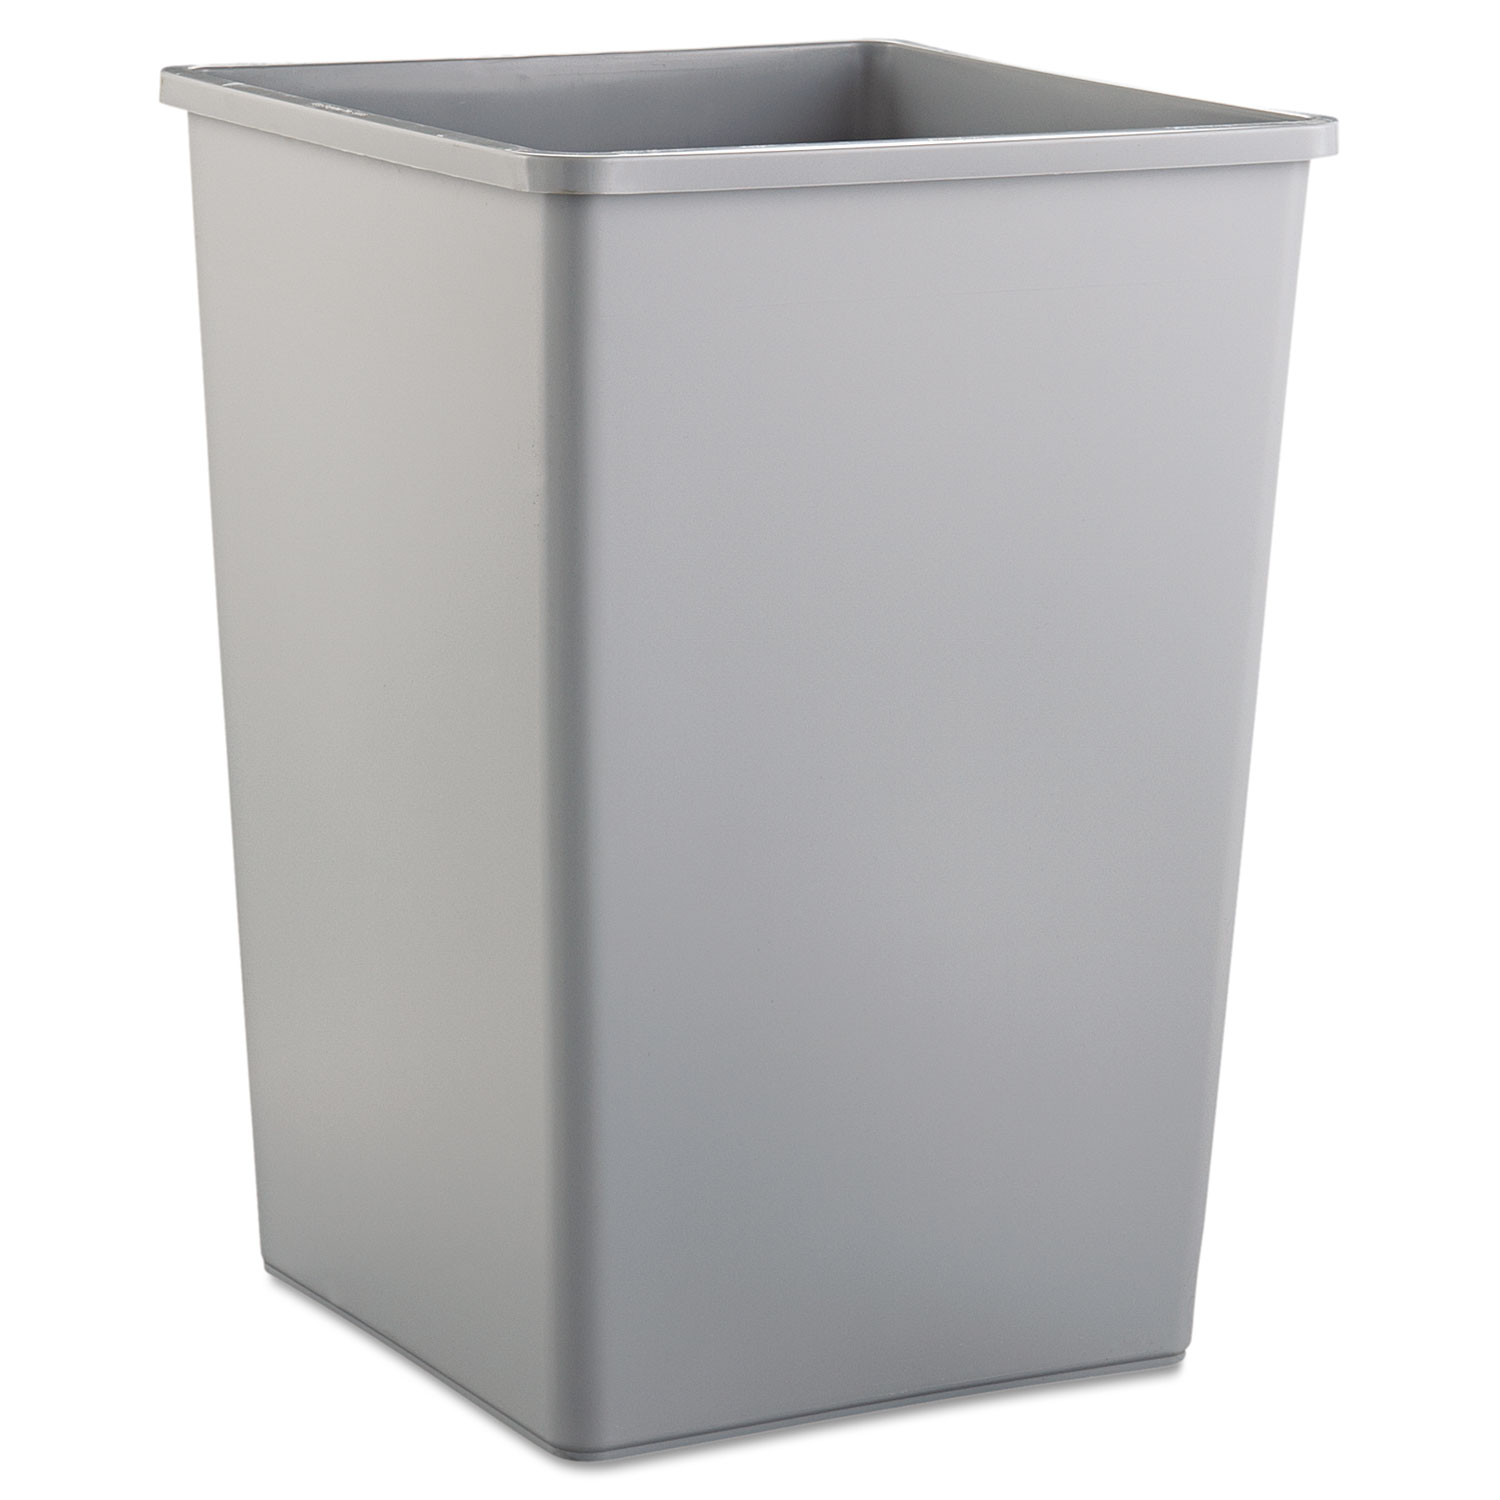  Rubbermaid Commercial 395800GRAY Untouchable Square Waste Receptacle, Plastic, 35 gal, Gray (RCP3958GRA) 